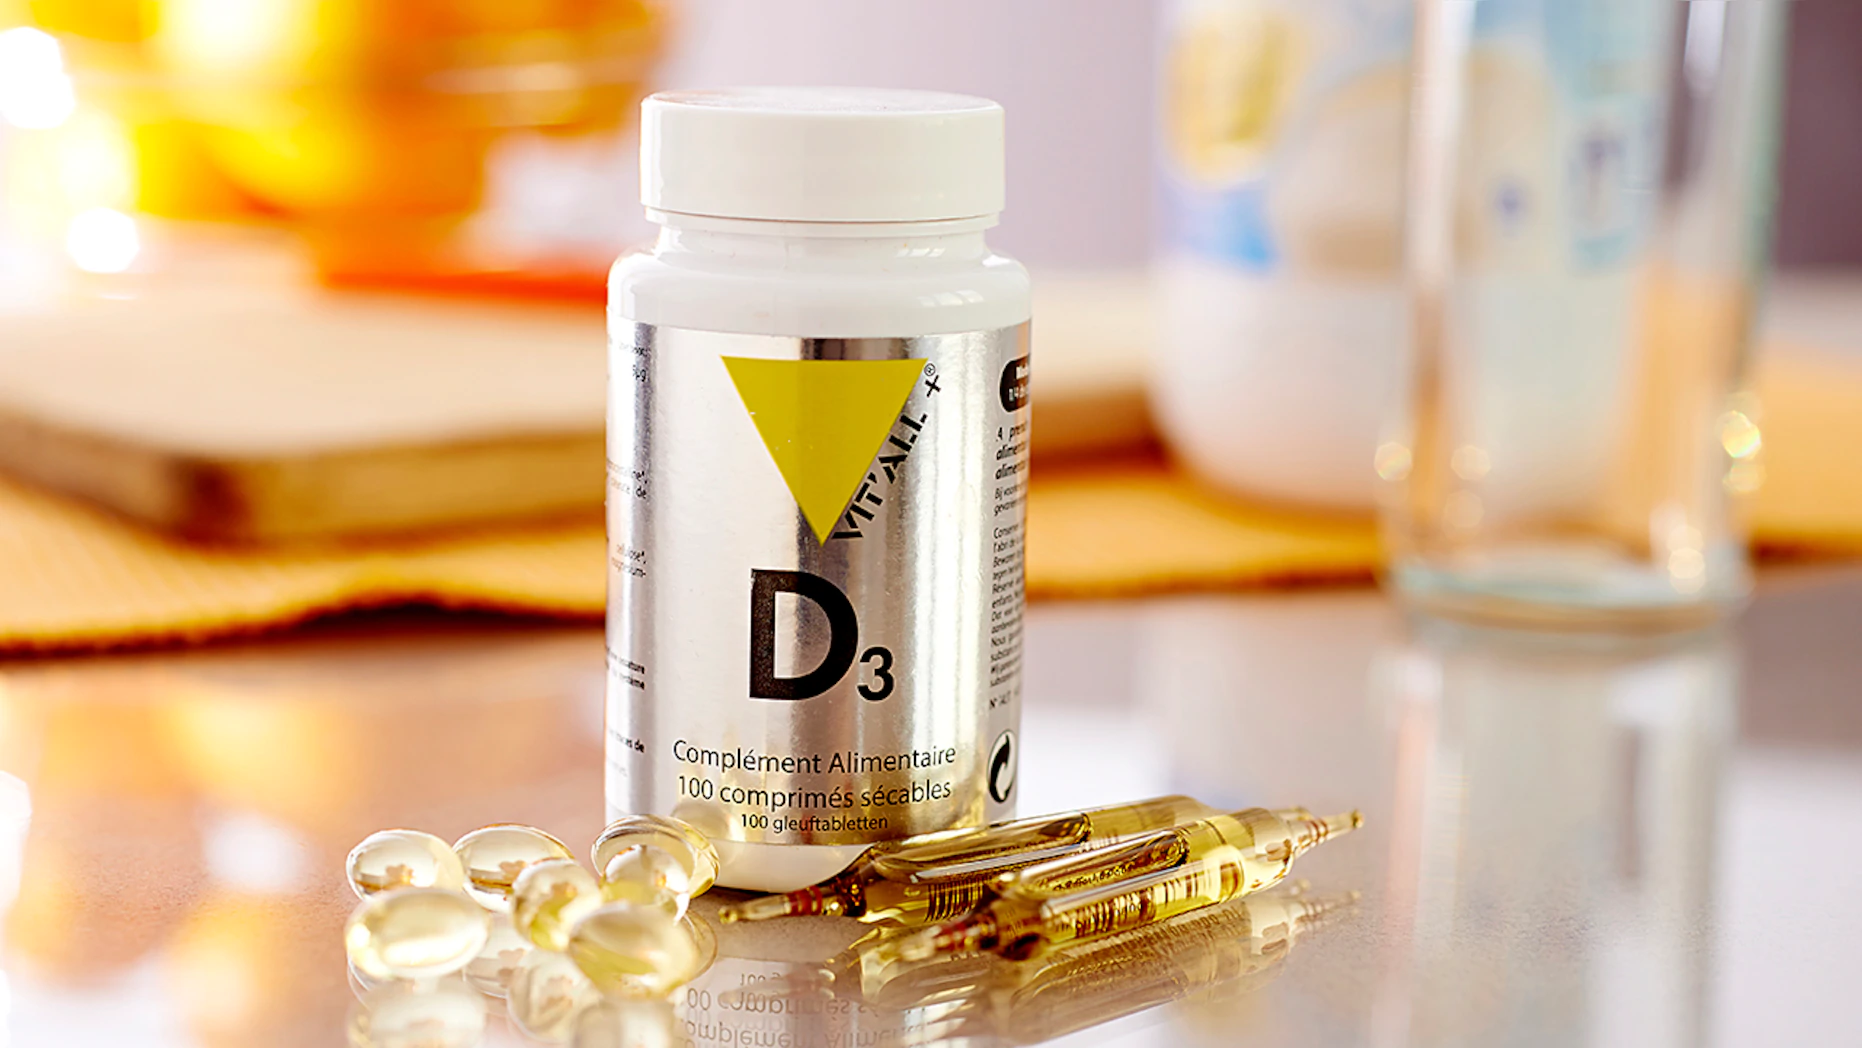 Vitamin D3 supplements (cholecalciferol). (Getty Images)